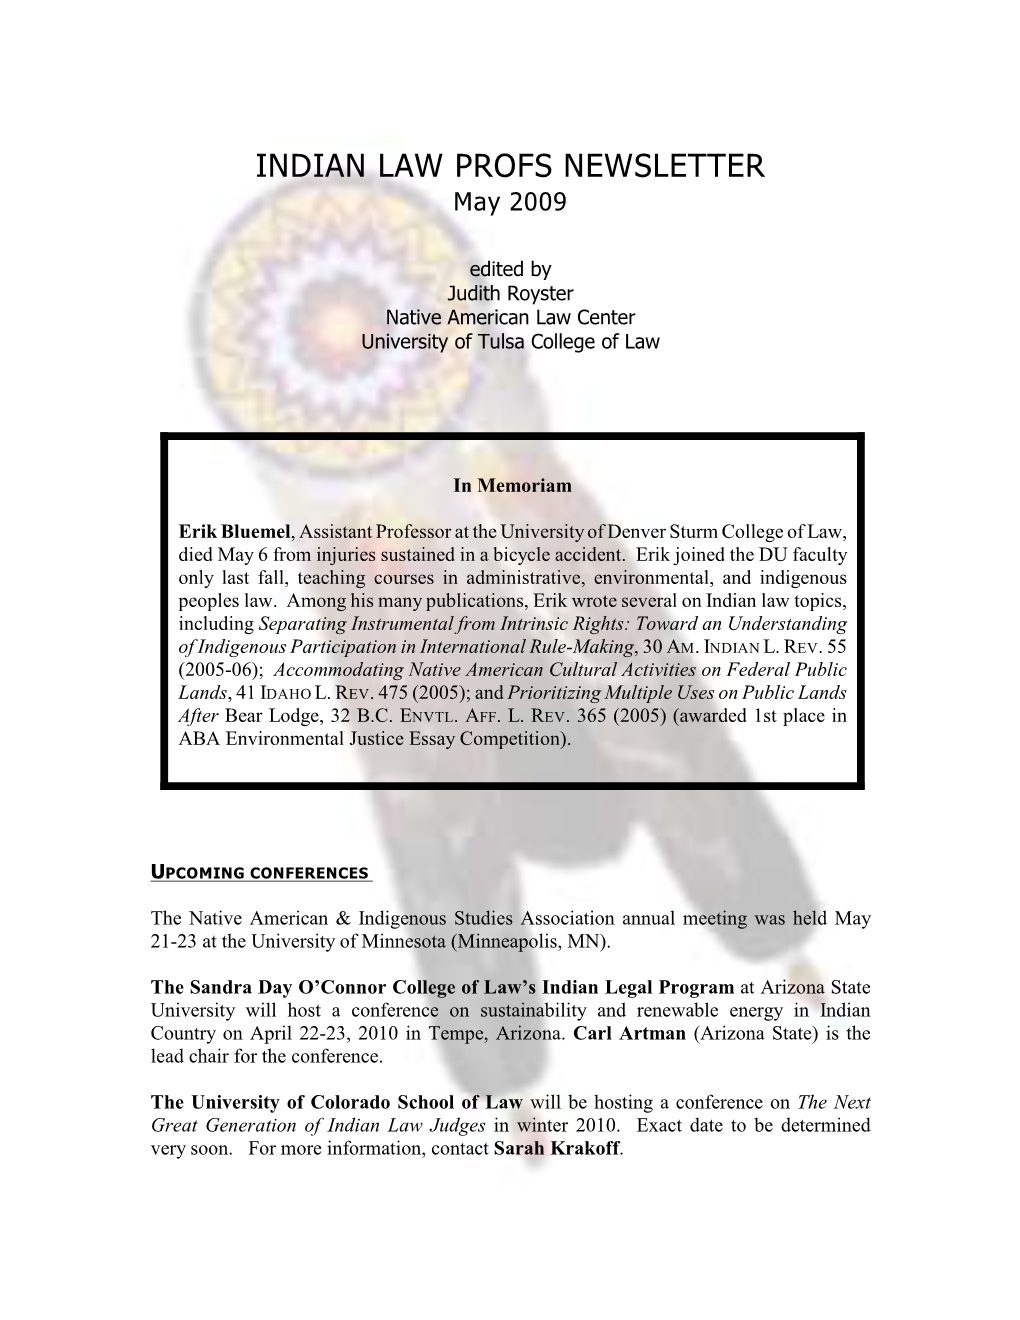 INDIAN LAW PROFS NEWSLETTER May 2009